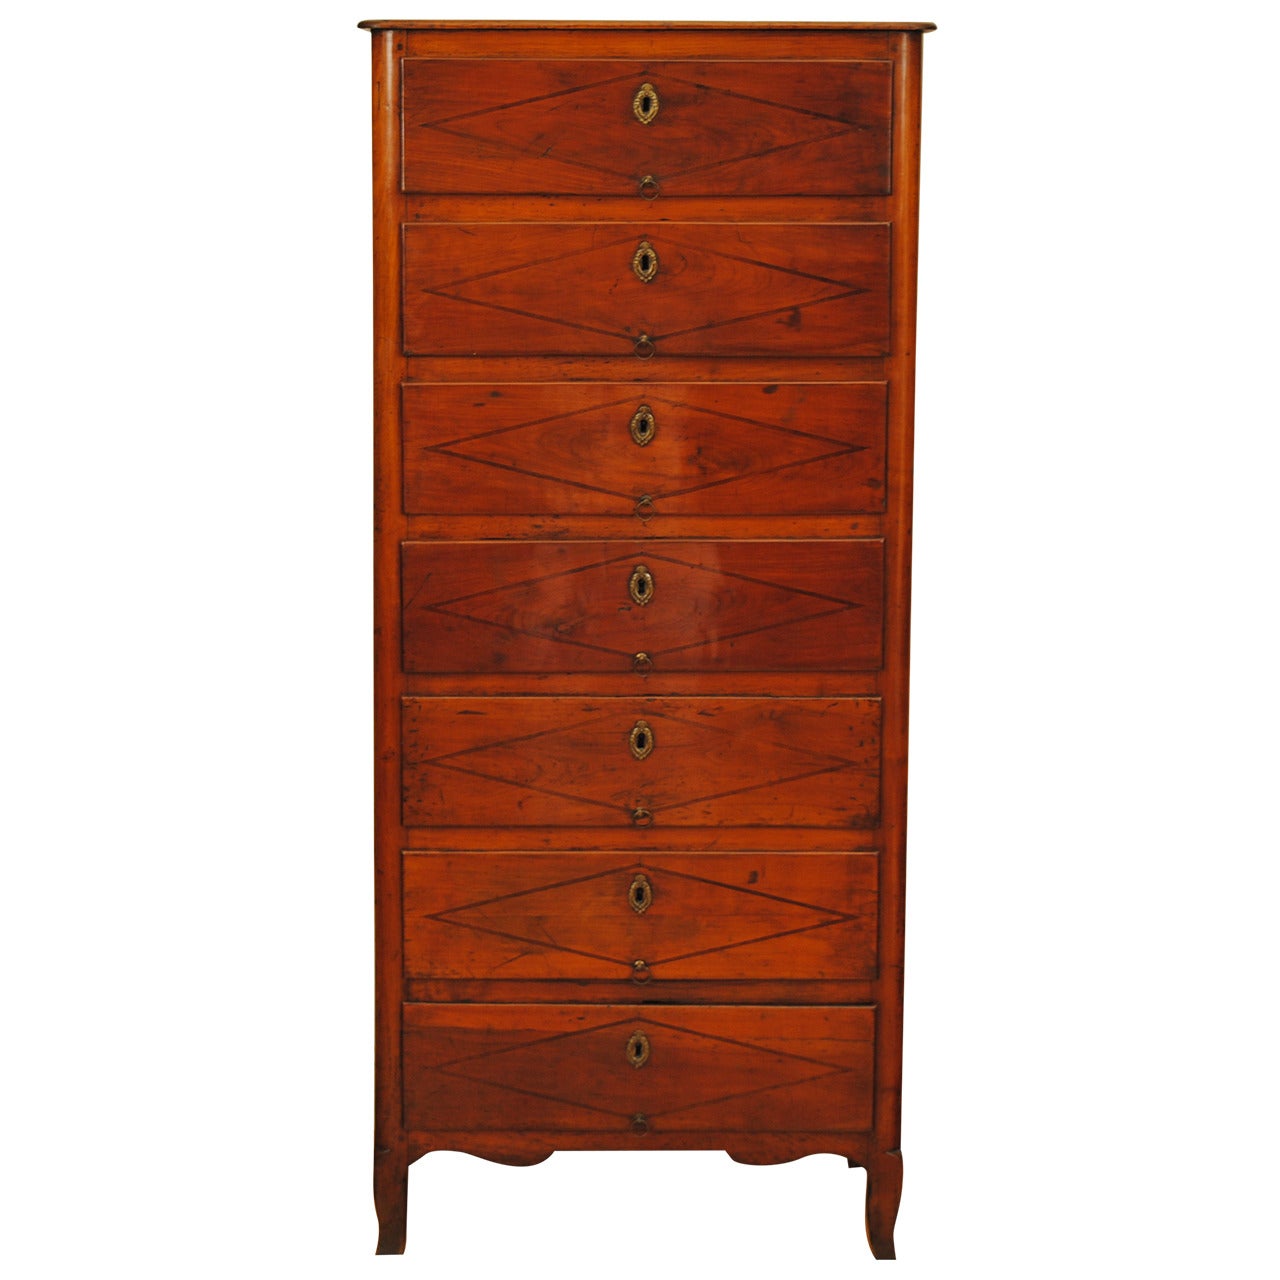 French Louis XV Period Fruitwood Semainier, Mid-18th Century